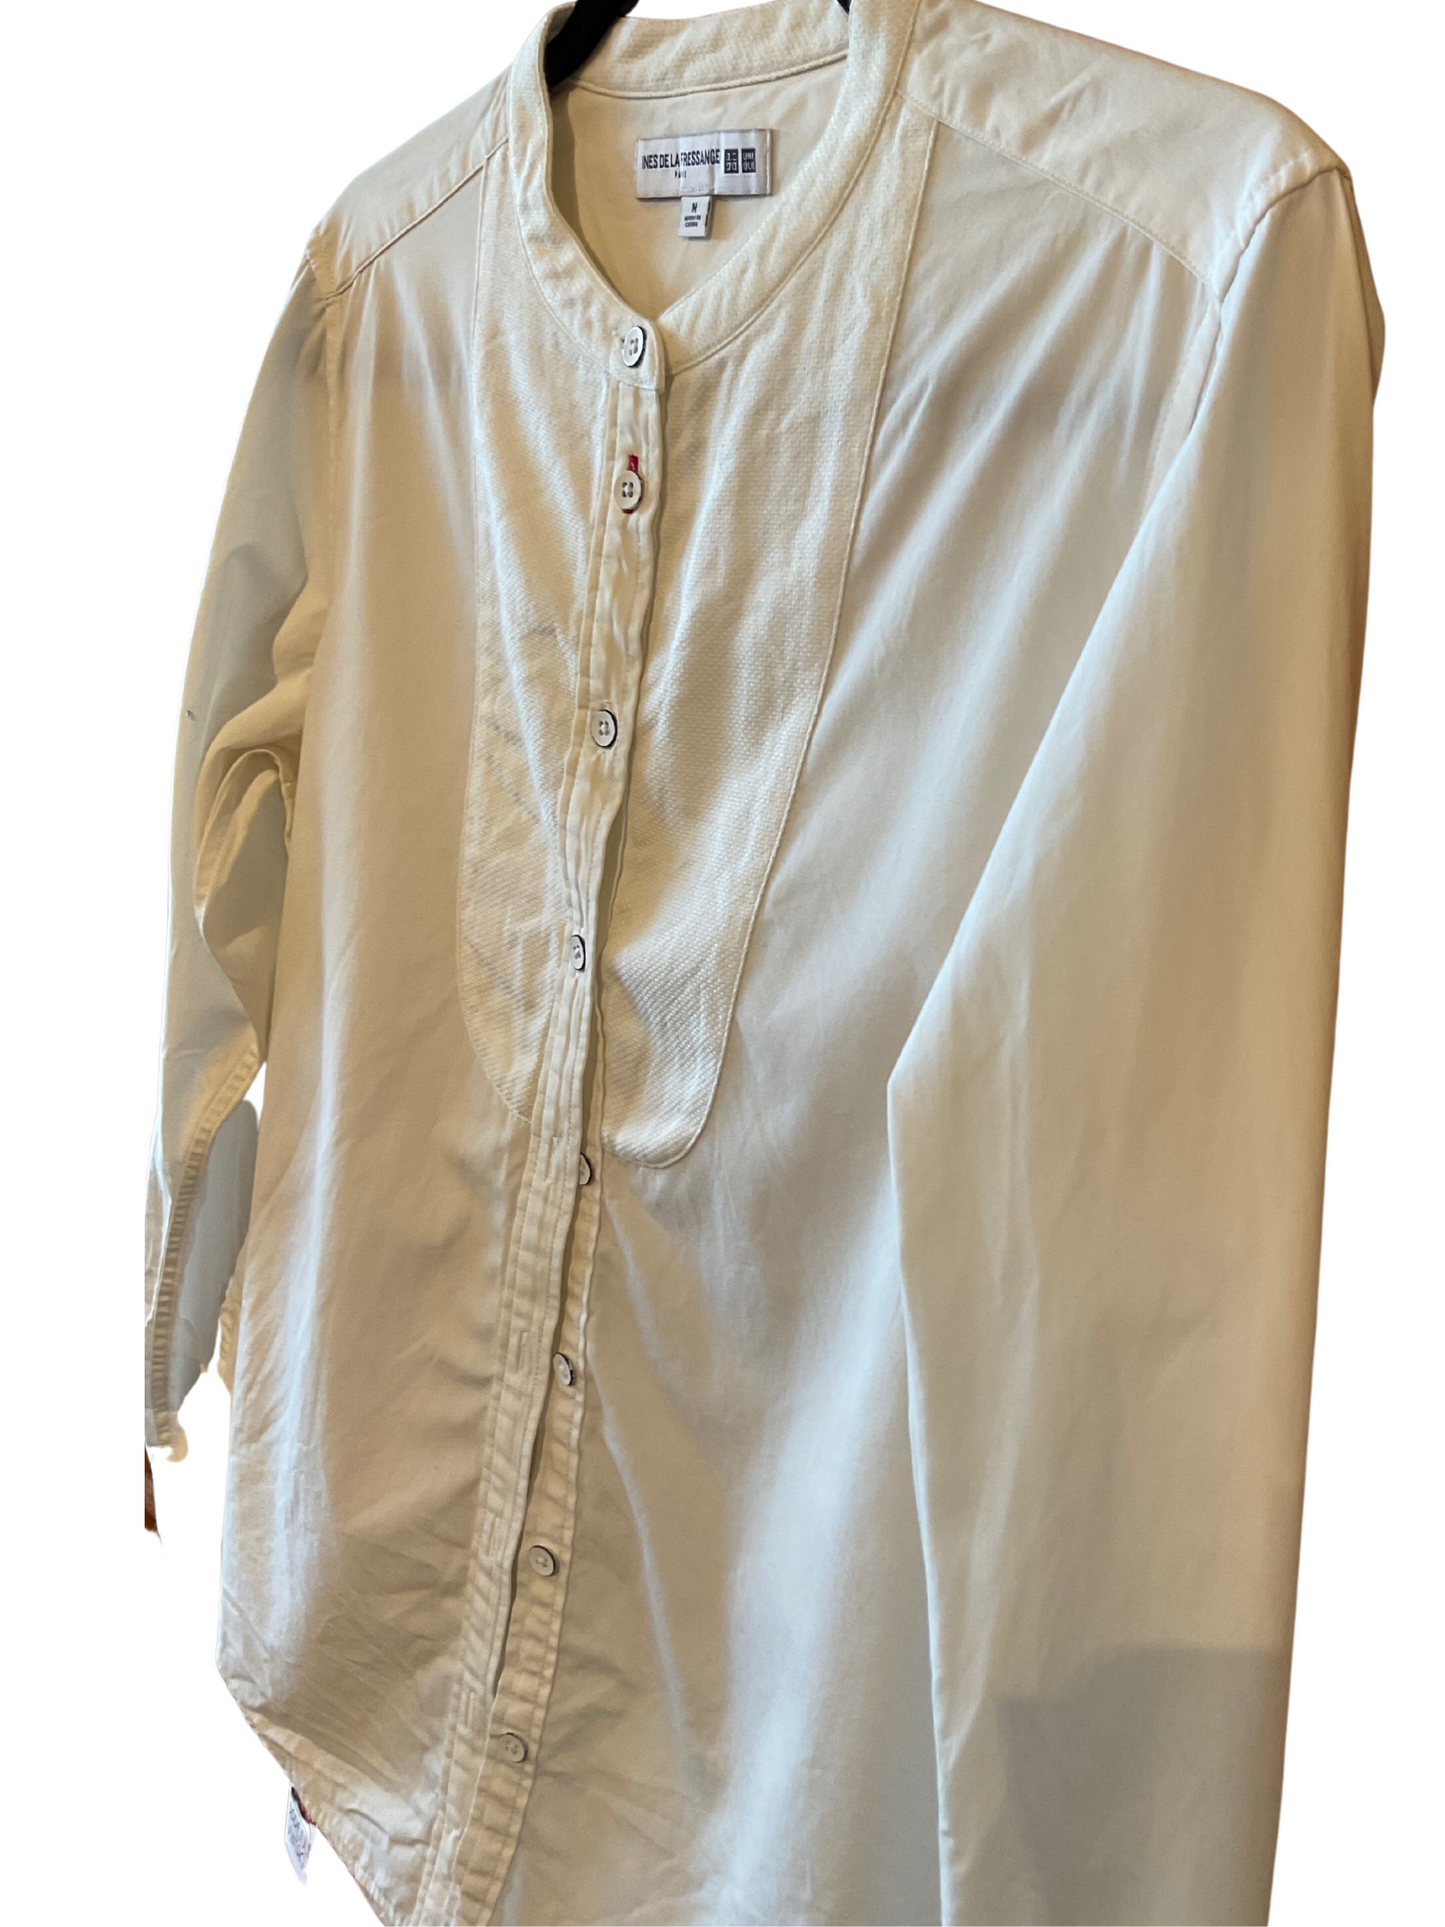 White Long Sleeved Blouse by Ines de la Fressage, Collarless / M